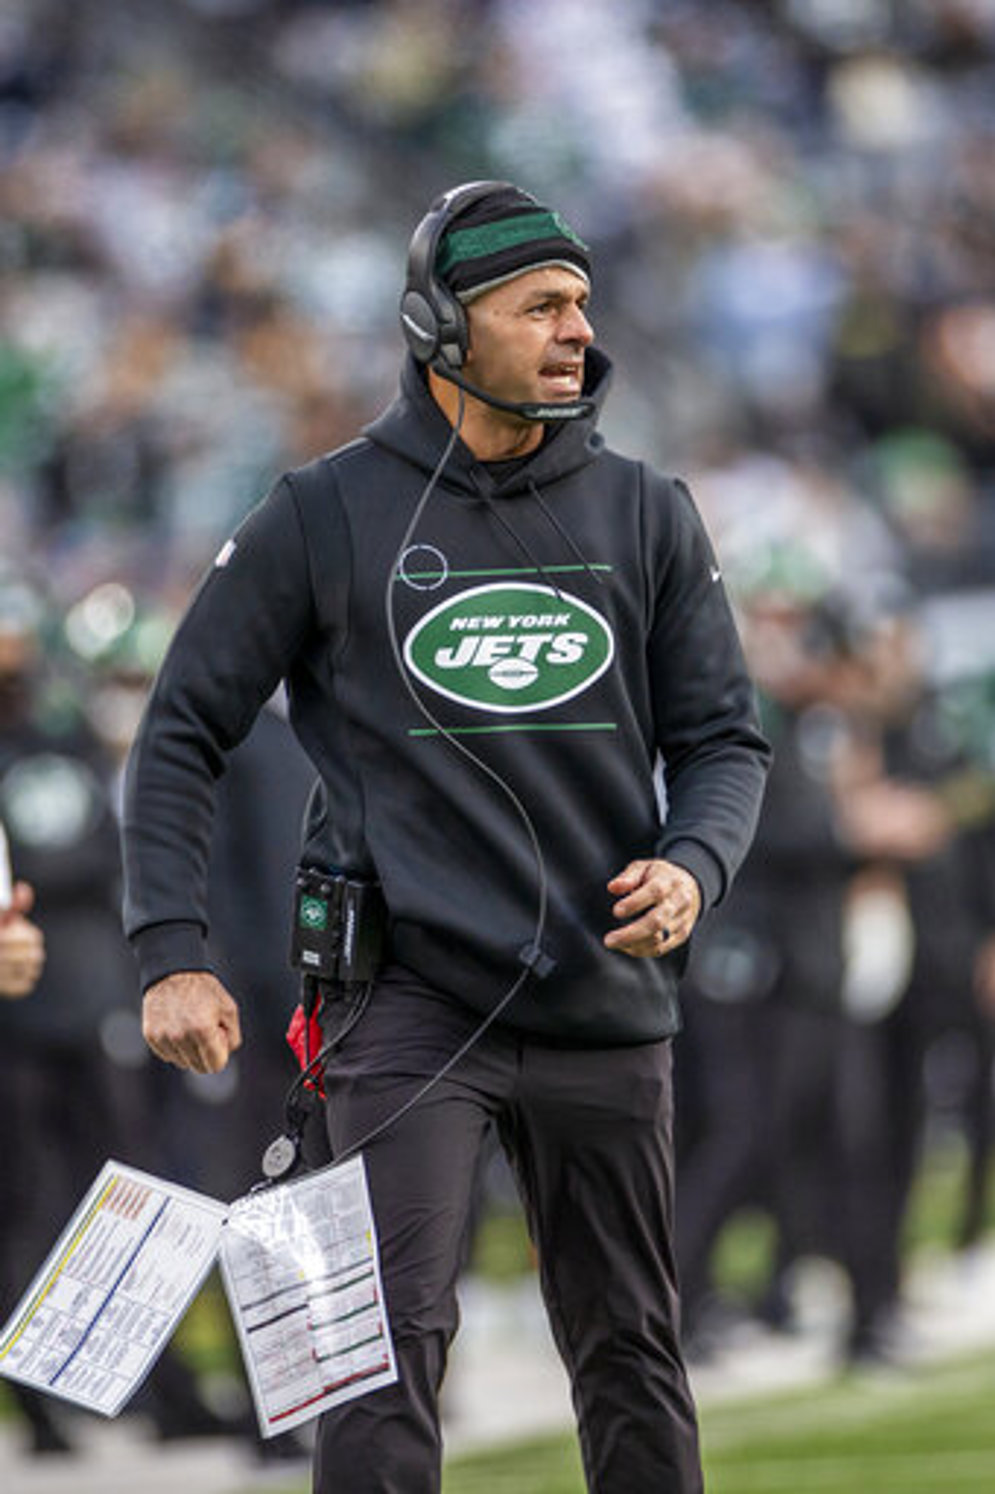 During the 2020 offseason, two out of seven head coaching vacancies were filled by minority candidates (Robert Saleh, New York Jets and David Culley, Houston Texans). Additionally, three out of the seven GM openings were filled by minority candidates (Terry Fontenot, Atlanta Falcons; Brad Holmes, Detroit Lions; Martin Mayhew, Washington Commanders). (AP/Damian Strohmeyer)